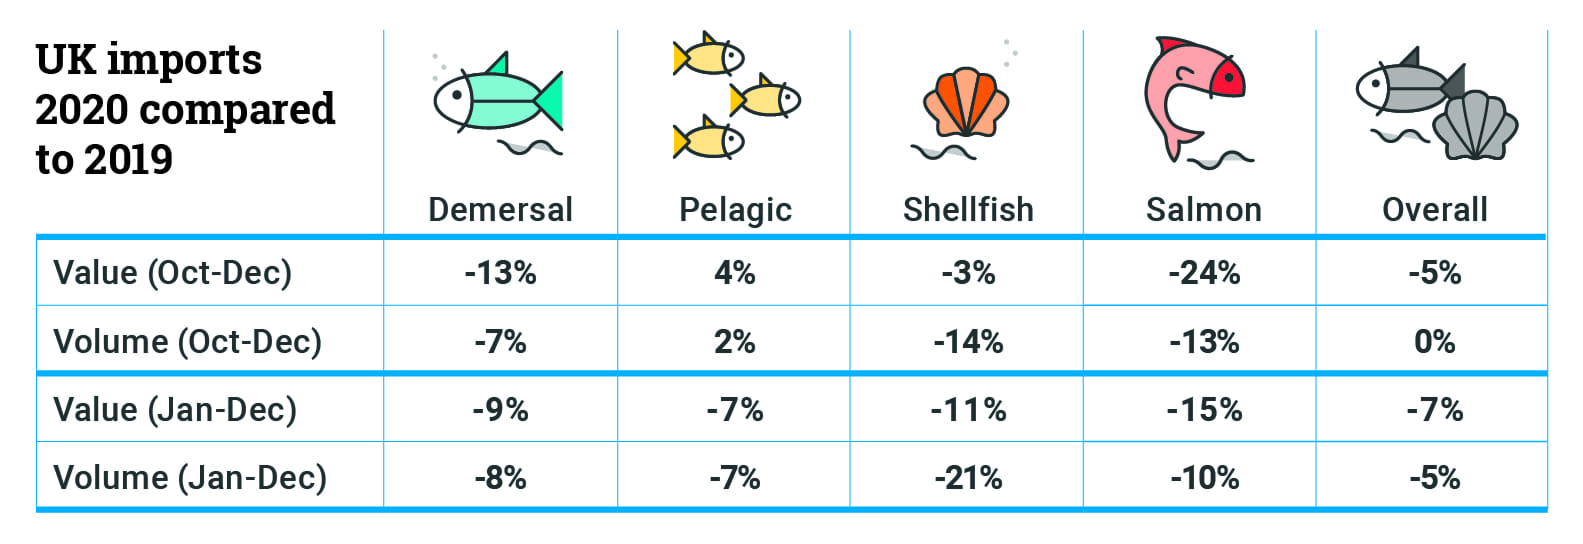 Table showing % of UK imports for demersal, pelagic, shellfish, salmon and overall by value and volume for 2020 compared to 2019